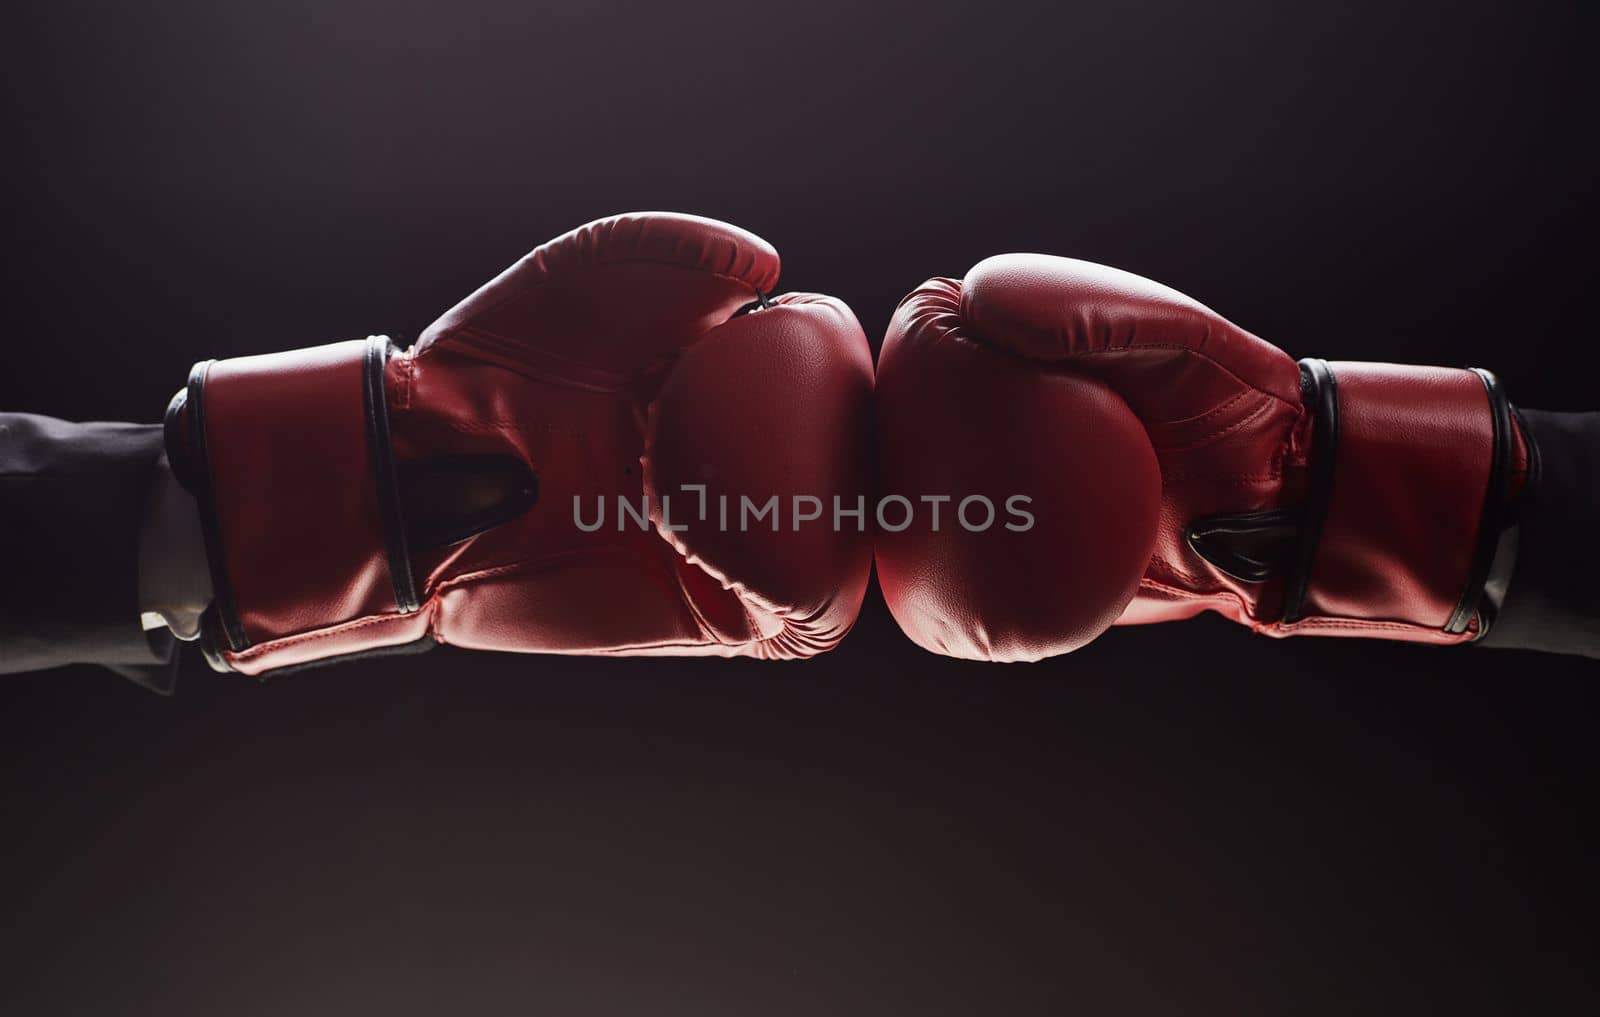 Two men's hands in boxing gloves. Confrontation concept by Prosto